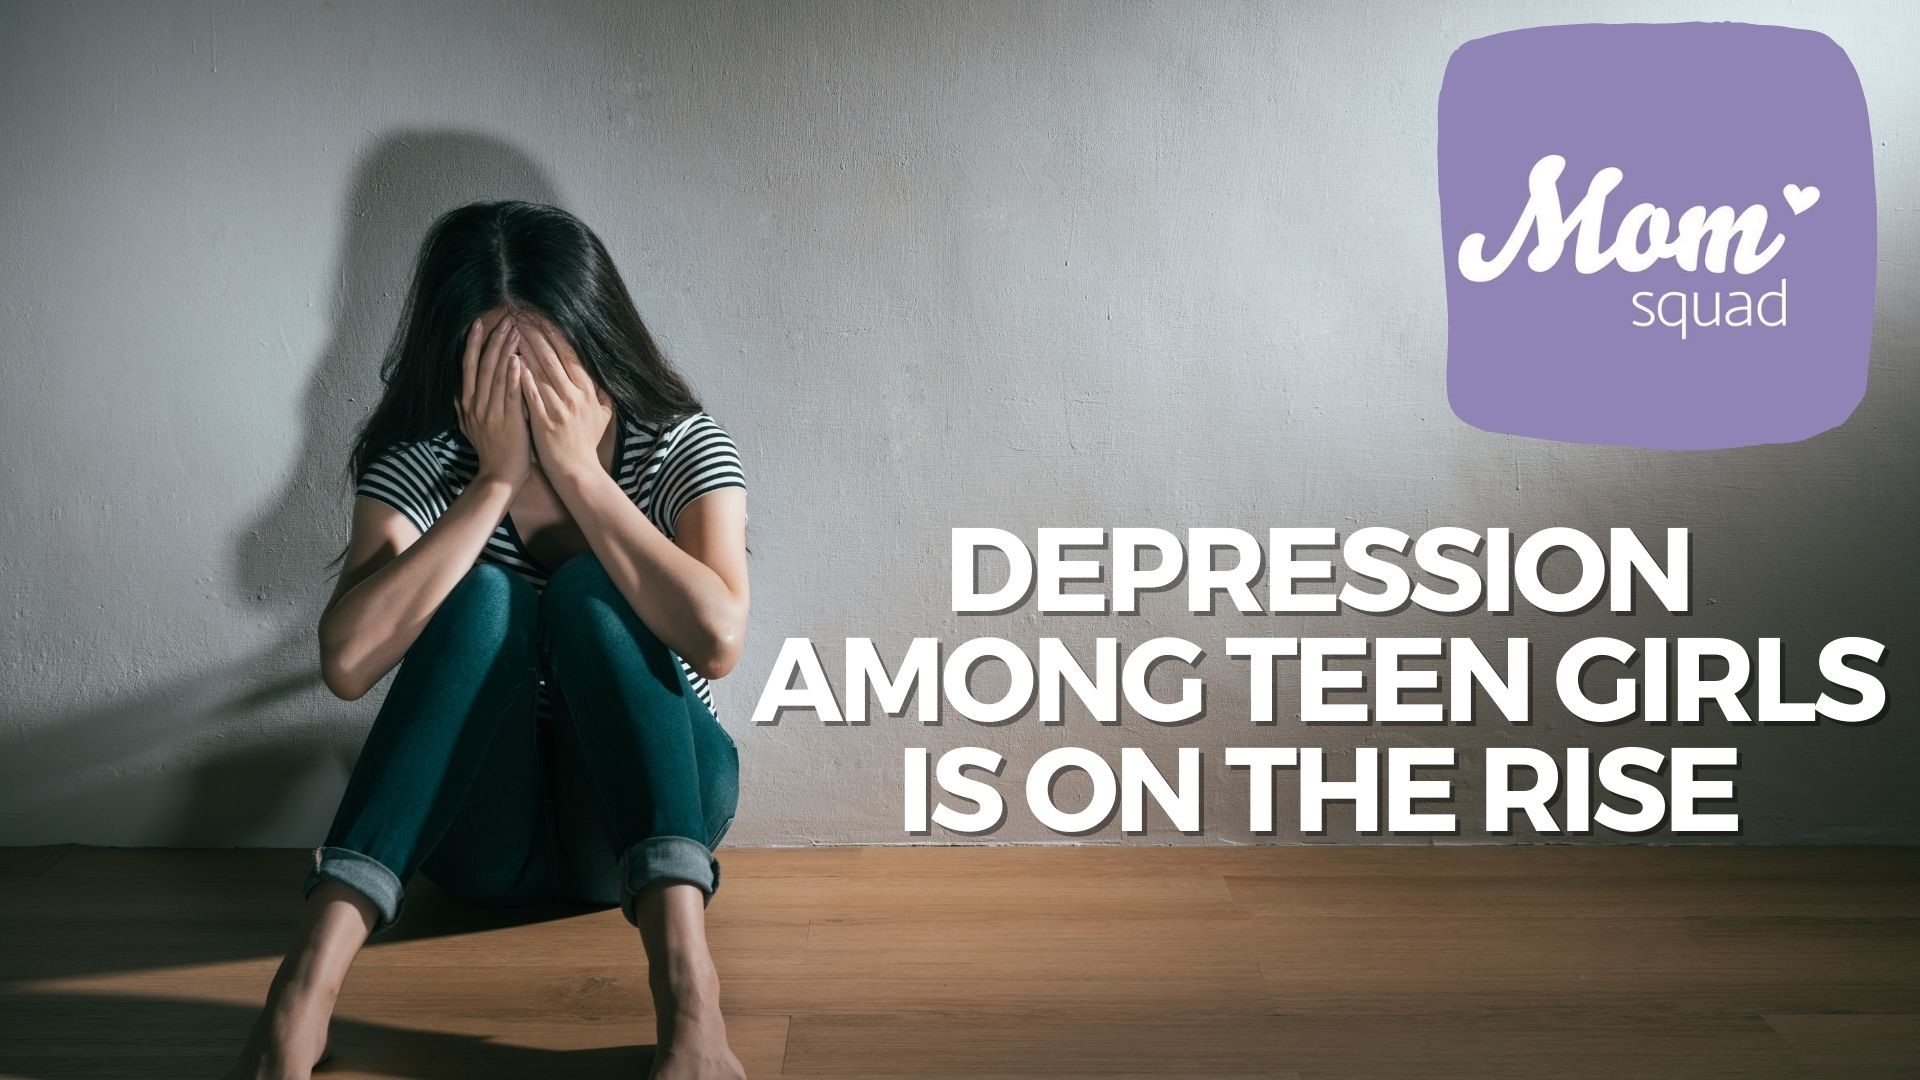 CDC data shows teen girls are dealing with an increase of depression, suicidal thoughts and sexual violence. Maureen Kyle spoke with an expert on how to help teens.